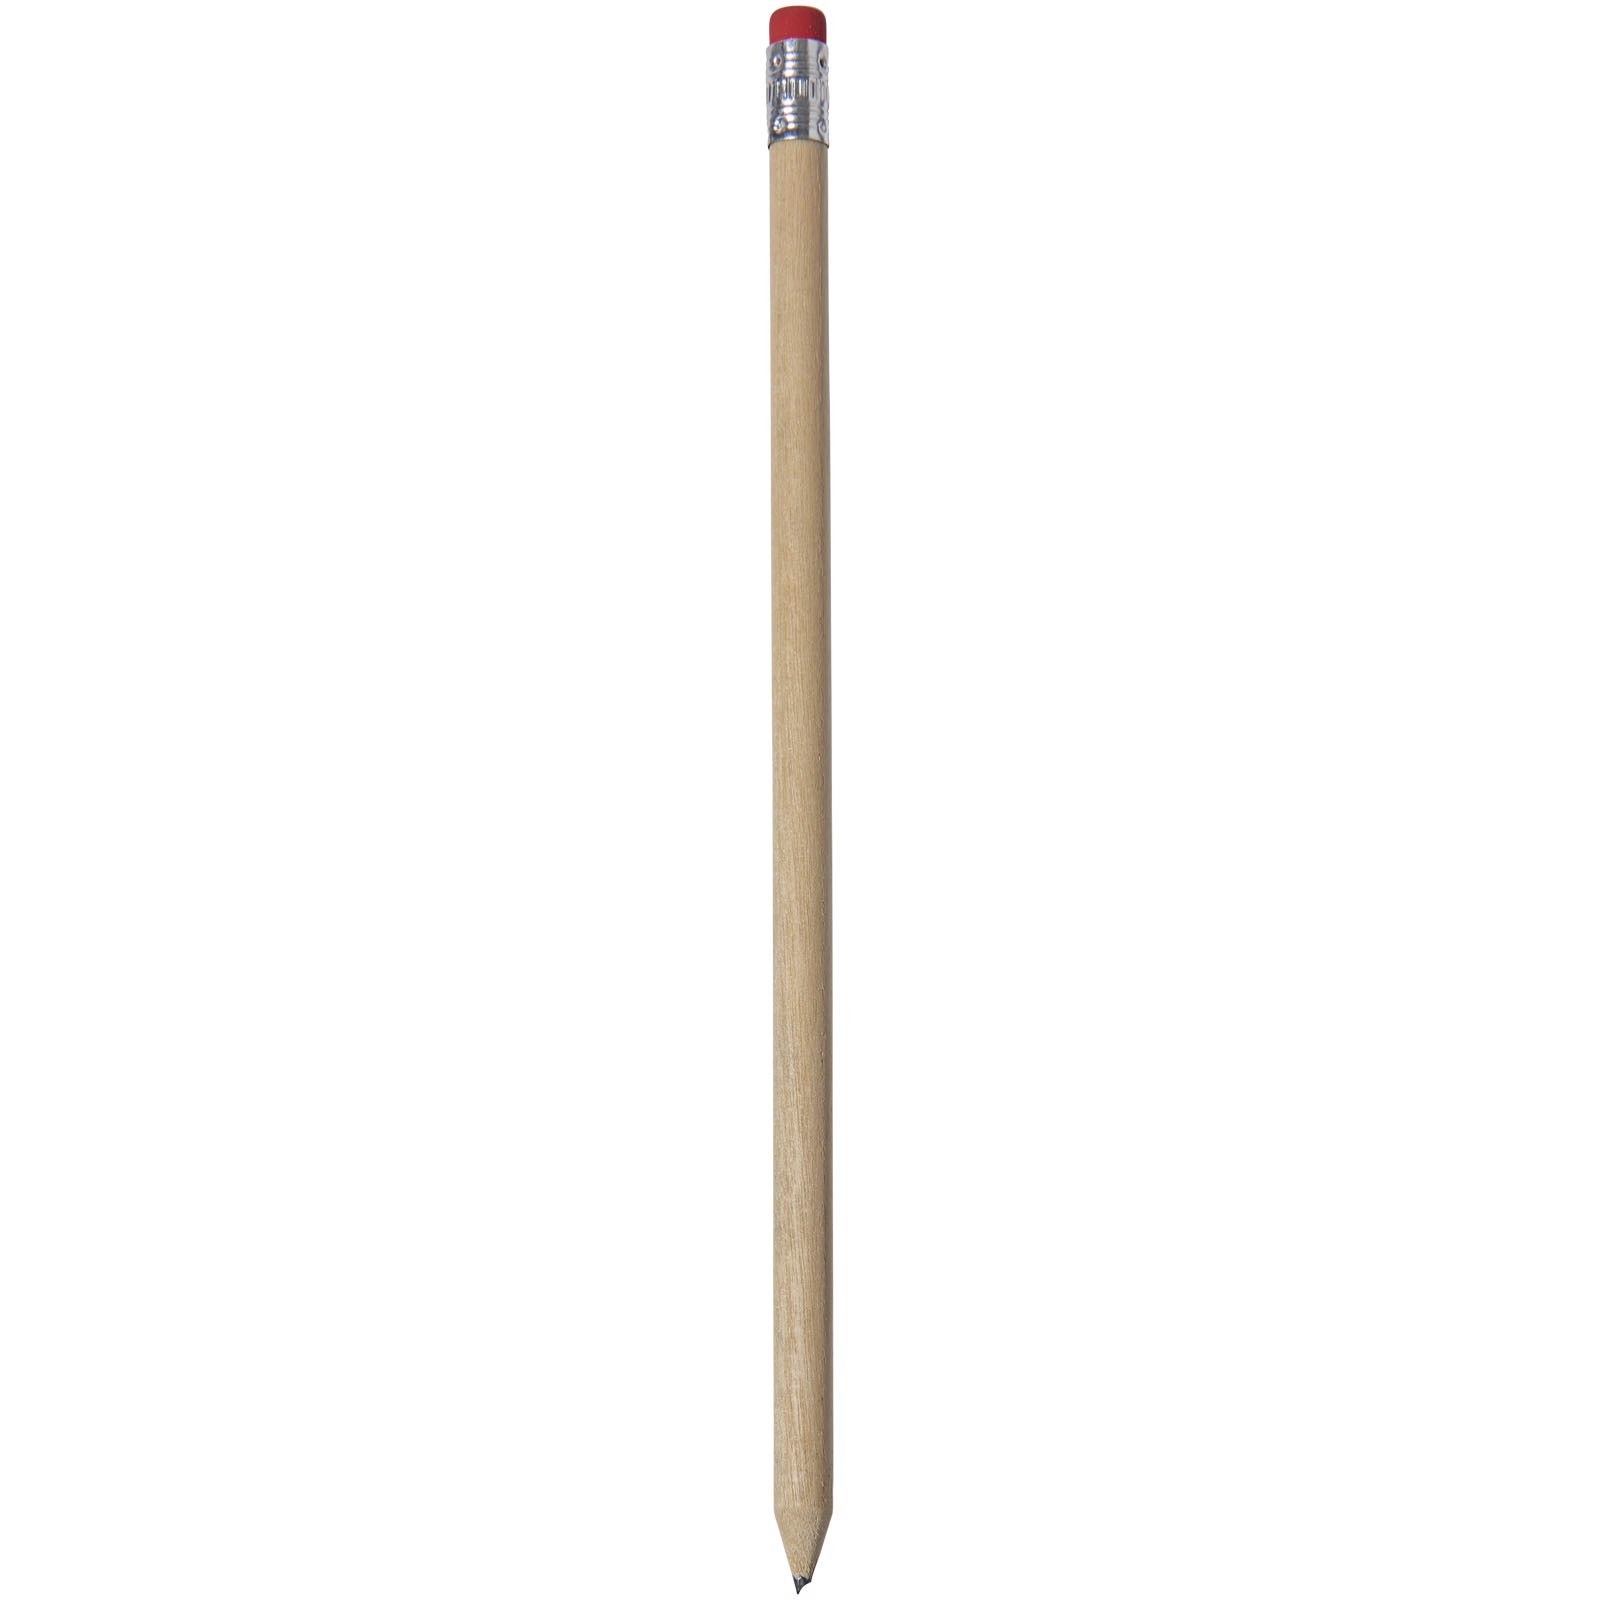 Cay wooden pencil with eraser - Natural / Red